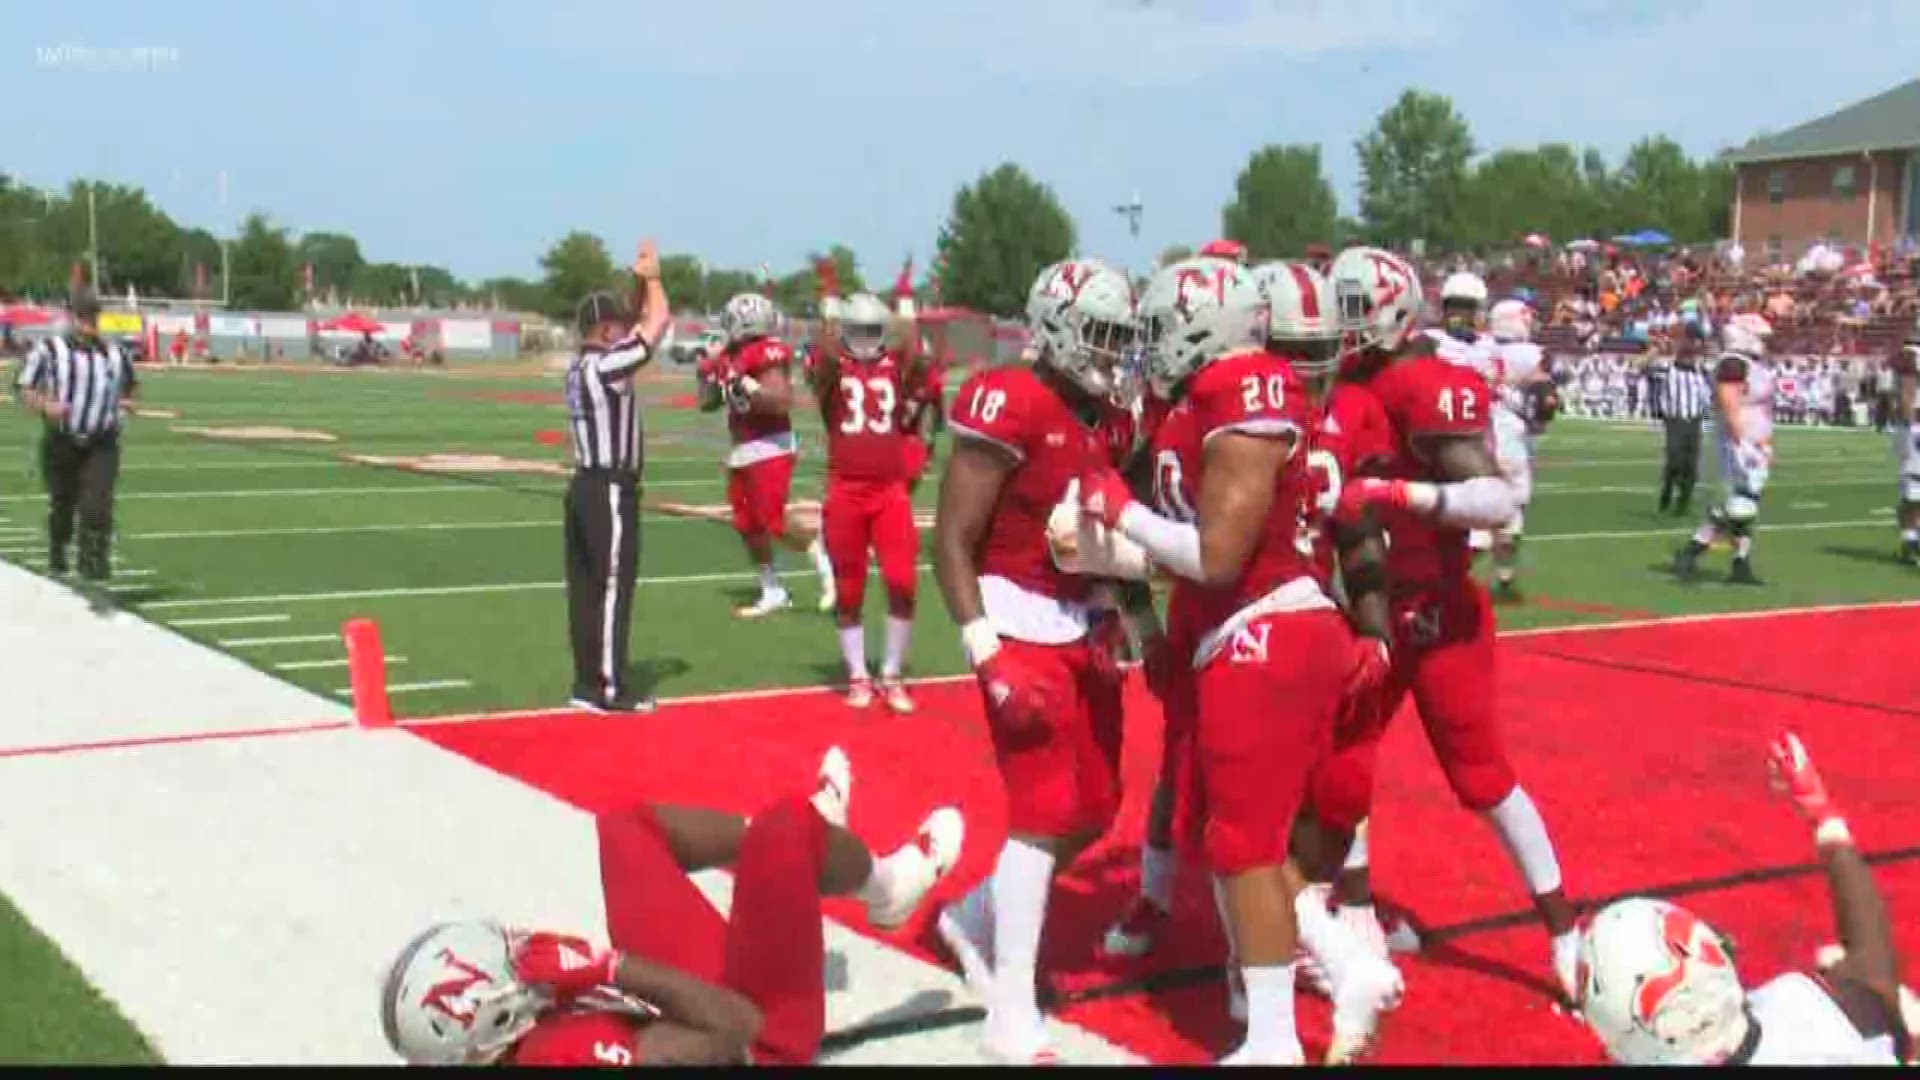 On an emotional day at Setzler Field, Newberry College earns its first win of the season with a 30-20 victory over Tusculum